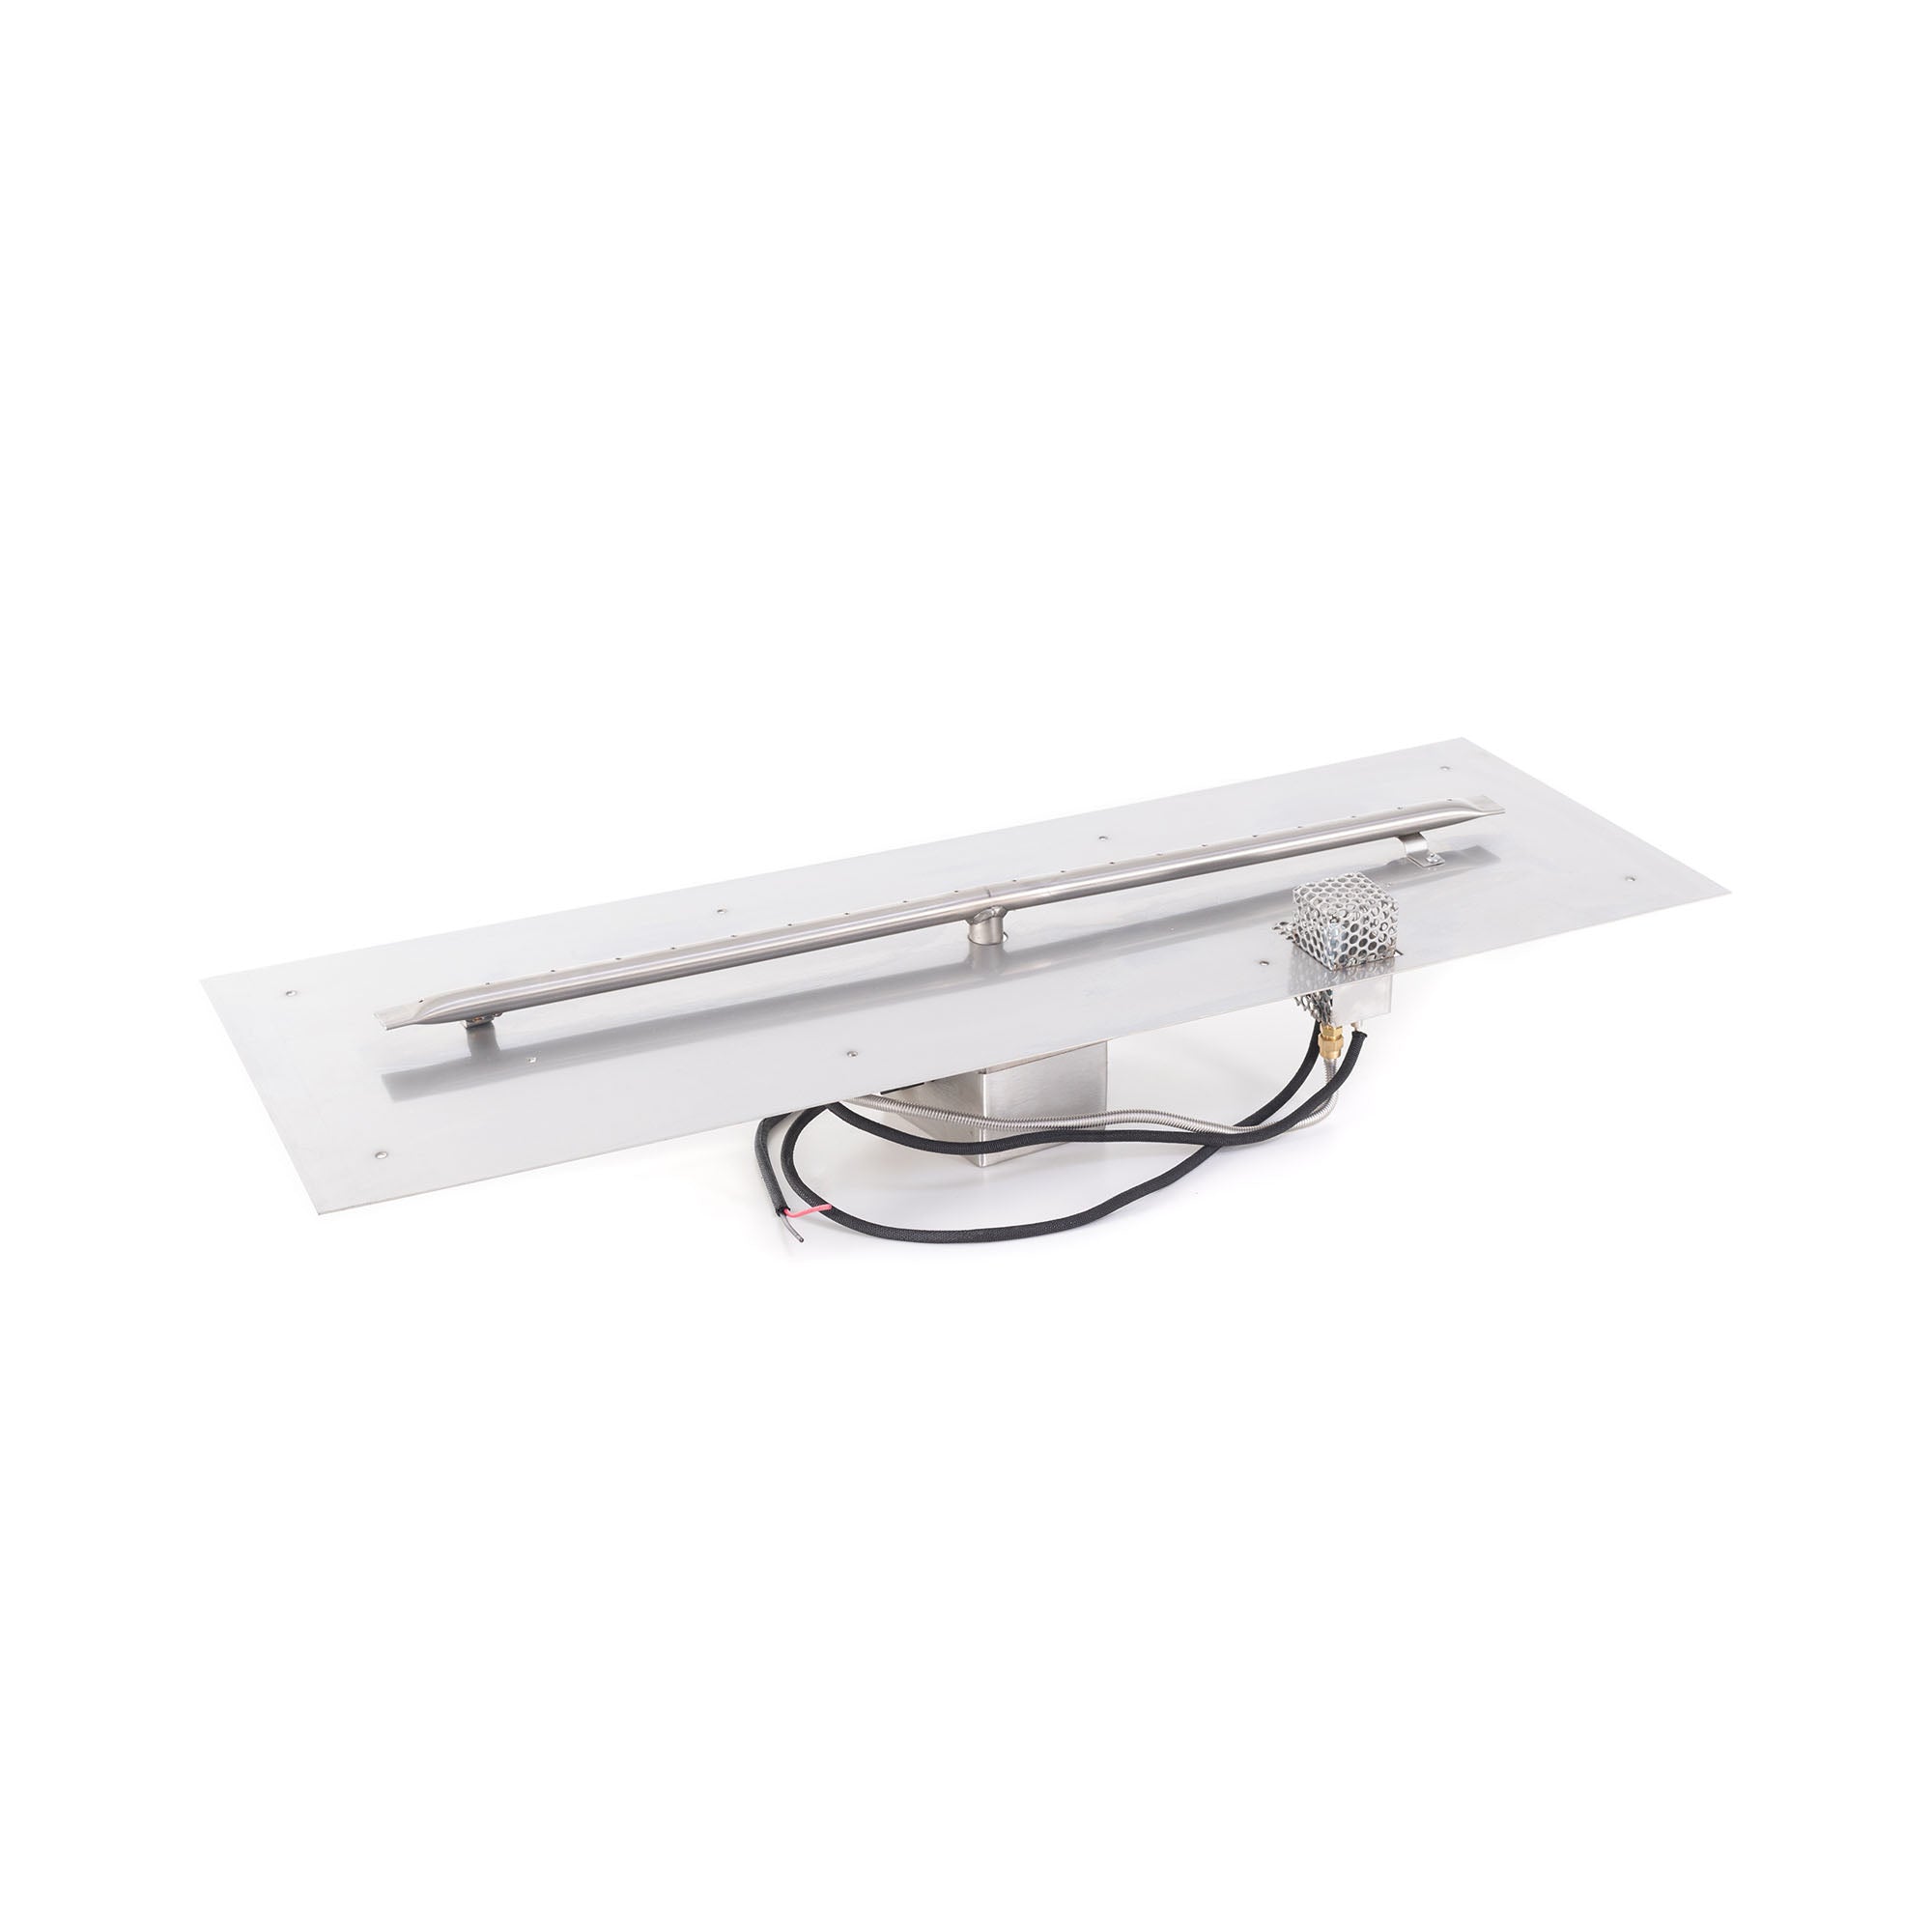 The Outdoor Plus - 42 Inch Rectangular Stainless Steel Flat Pan and 36 Inch Linear Burner - OPT-REFS642